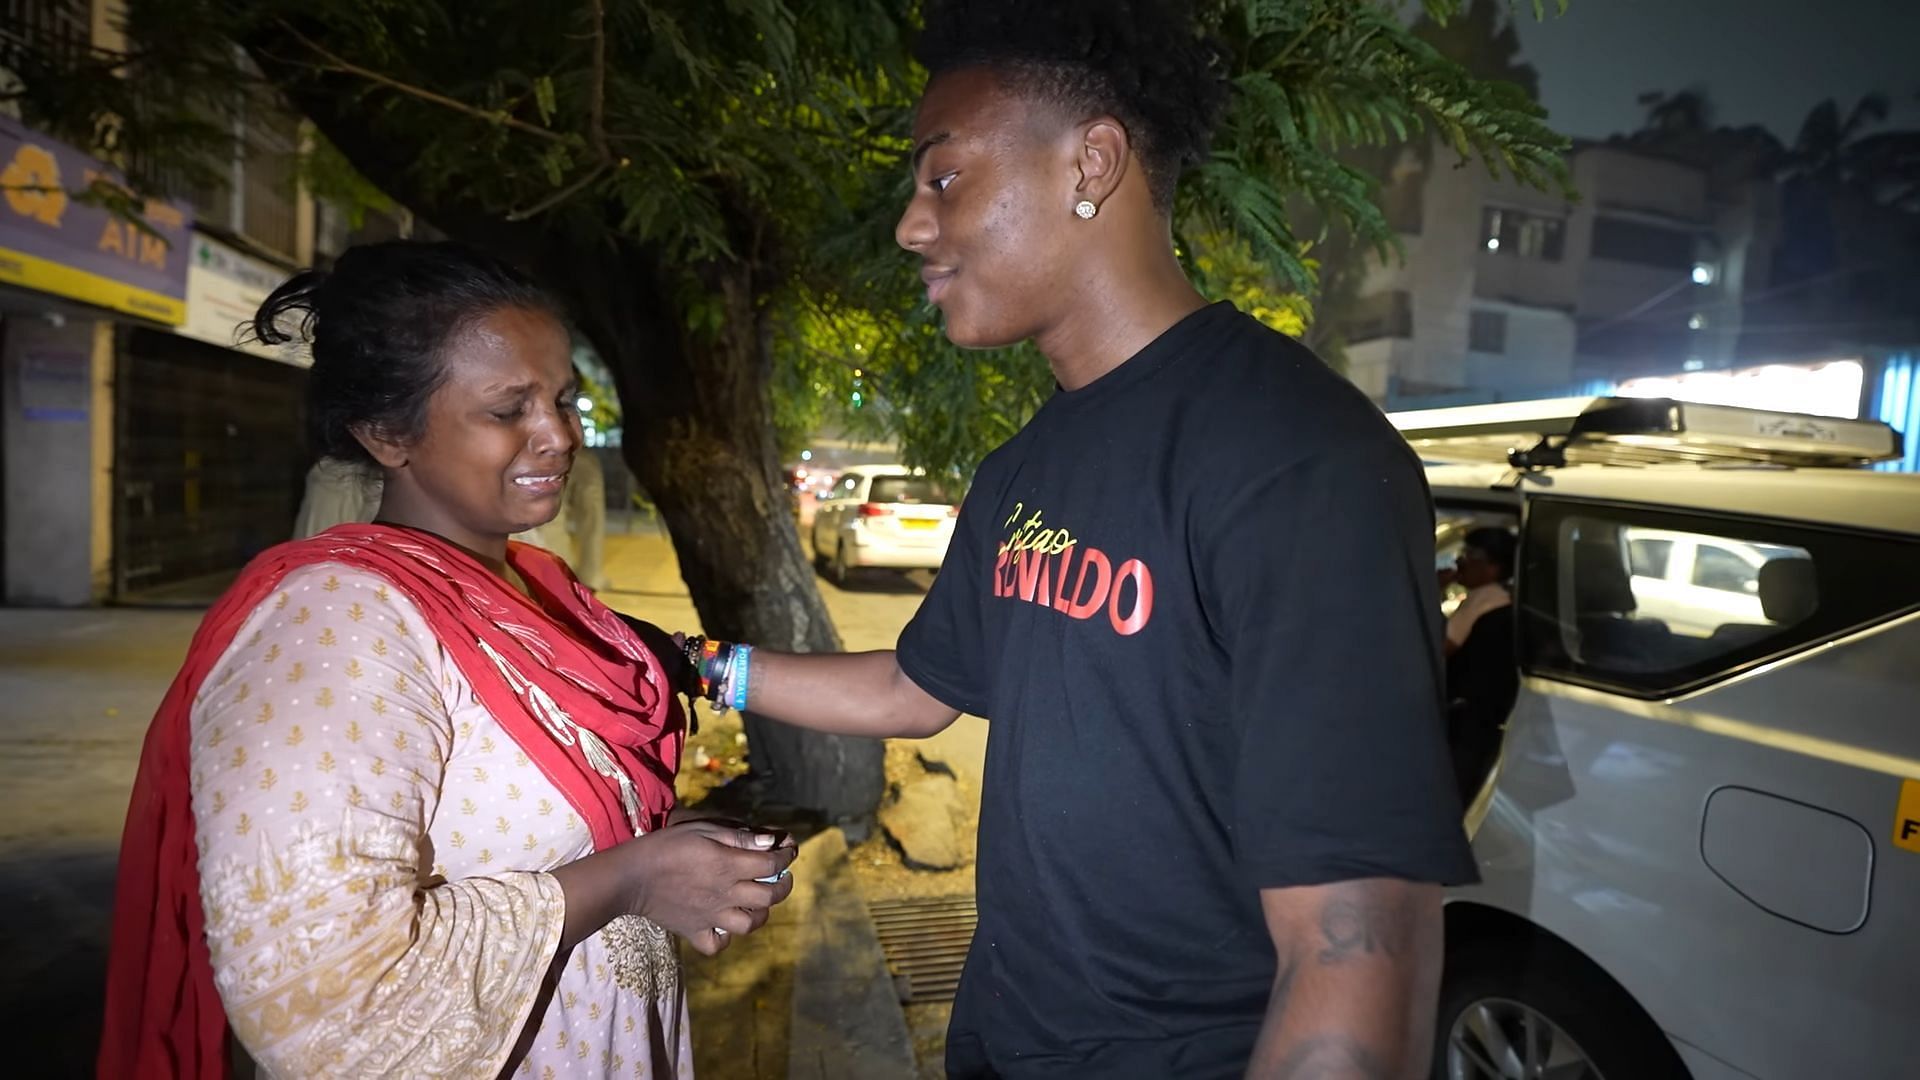 IShowSpeed wins hearts after donating money to single mother in the streets of India (Image via IShowSpeed/YouTube)